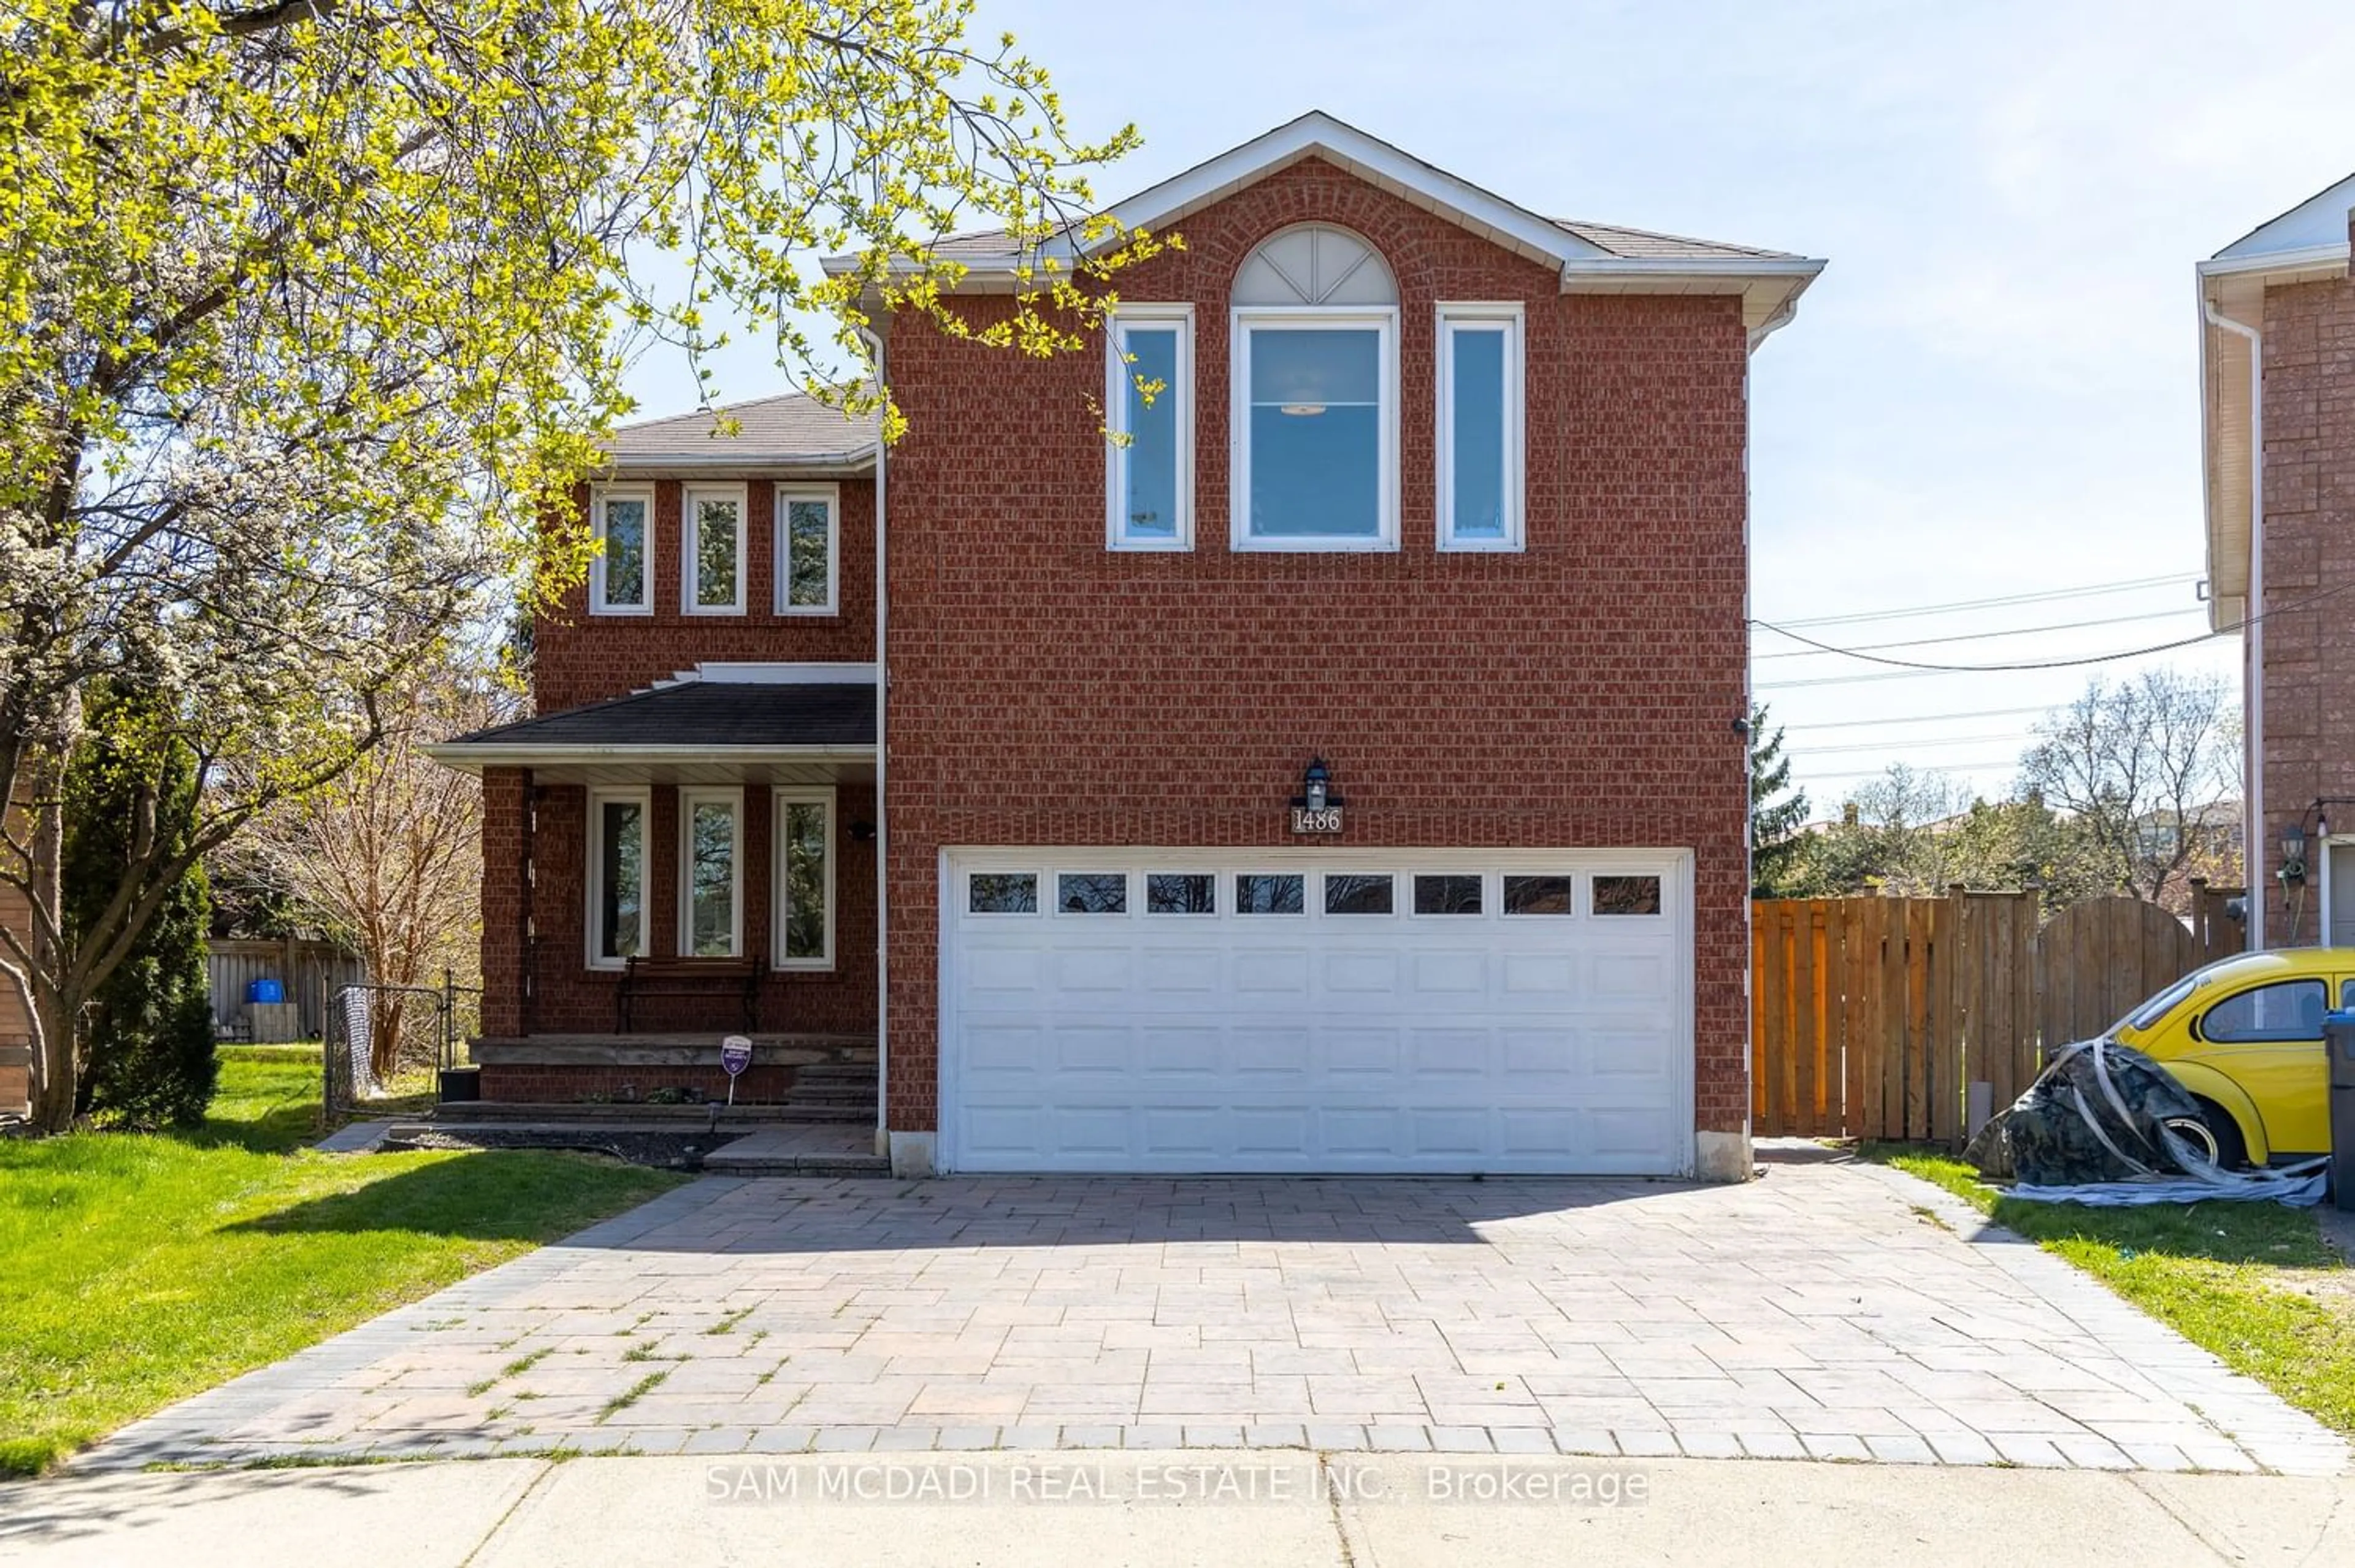 Home with brick exterior material for 1486 Emerson Lane, Mississauga Ontario L5V 1L6